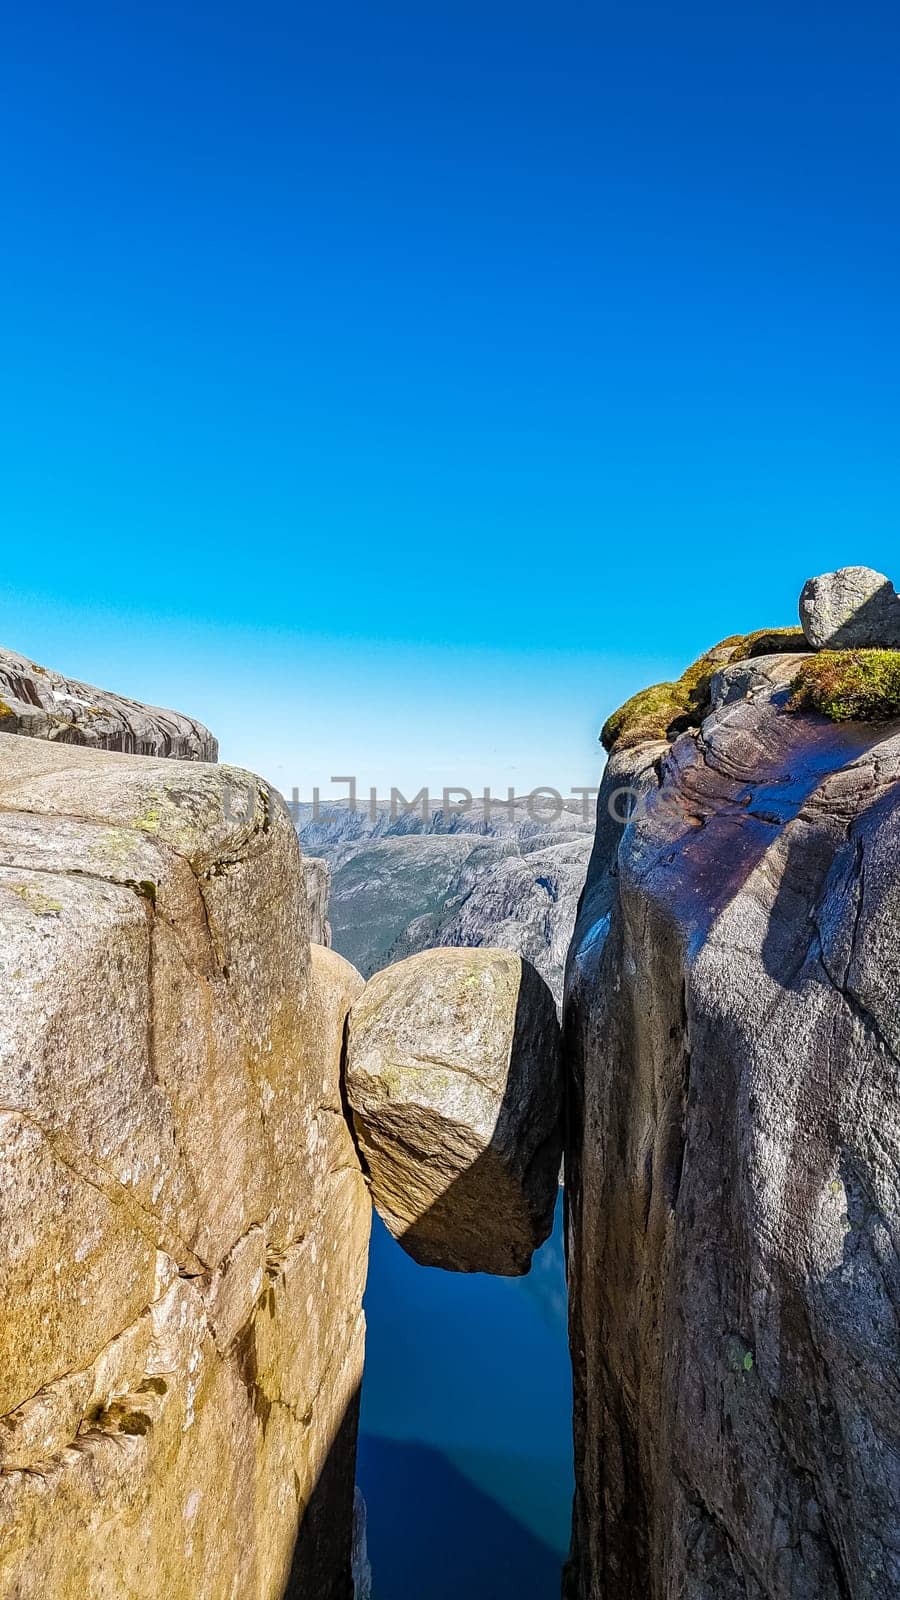 Kjeragbolten, Norway A large boulder precariously perched between two cliffs at the Pulpit Rock in Norway.